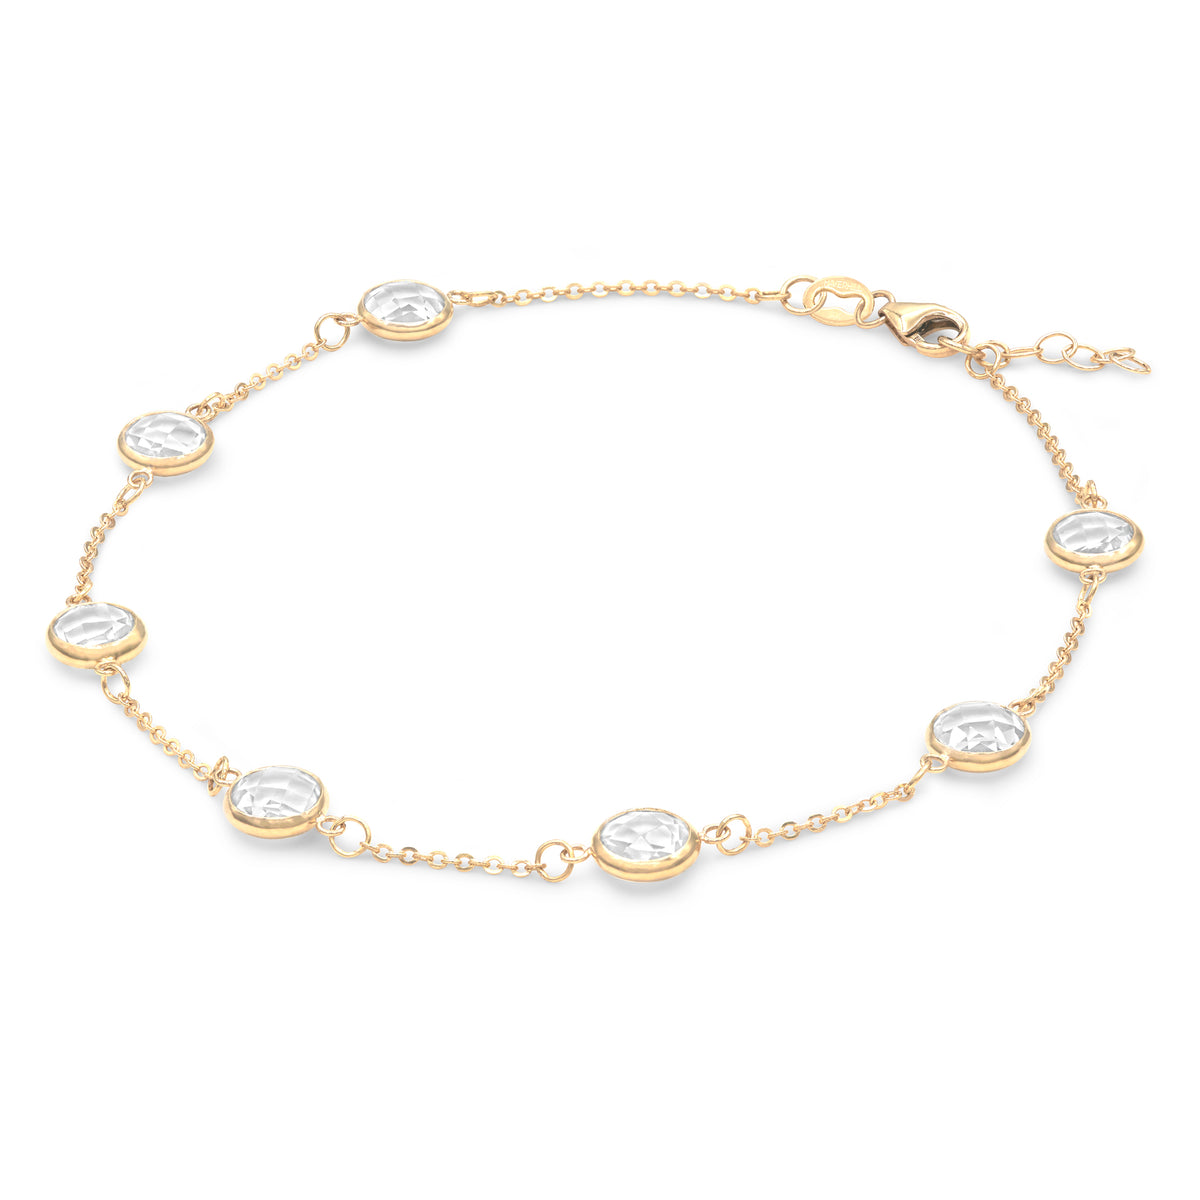 R Initial Bezel Chain Bracelet Adjustable Size 5.5 - 8 (Additional Sizes Available by request) / White Topaz / 24K Yellow Gold Vermeil